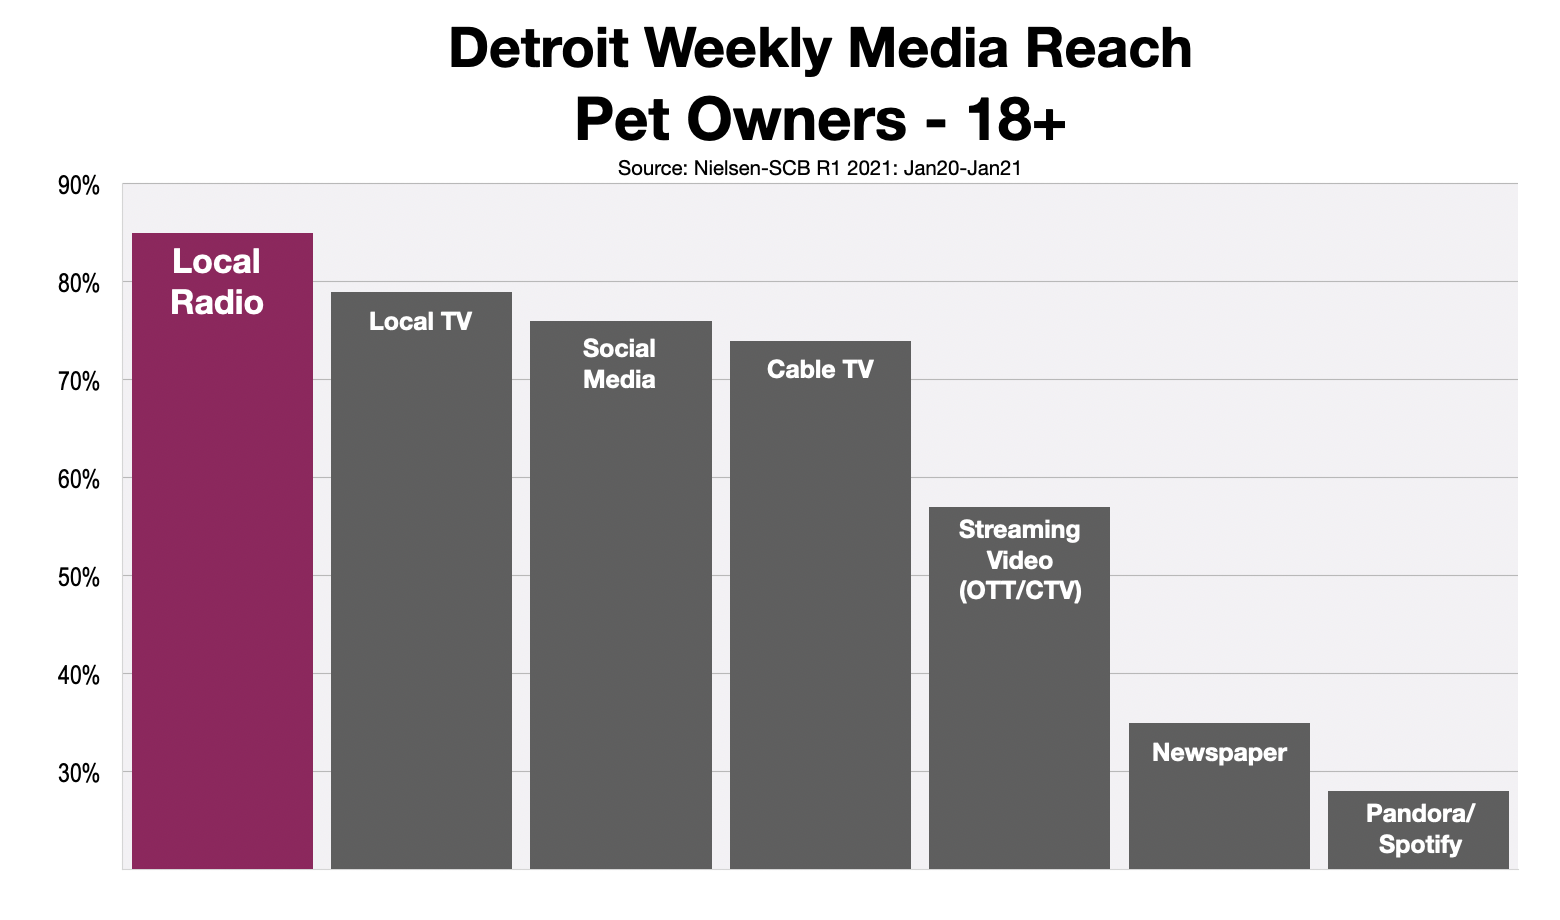 Advertise To Pet Owners in Detroit